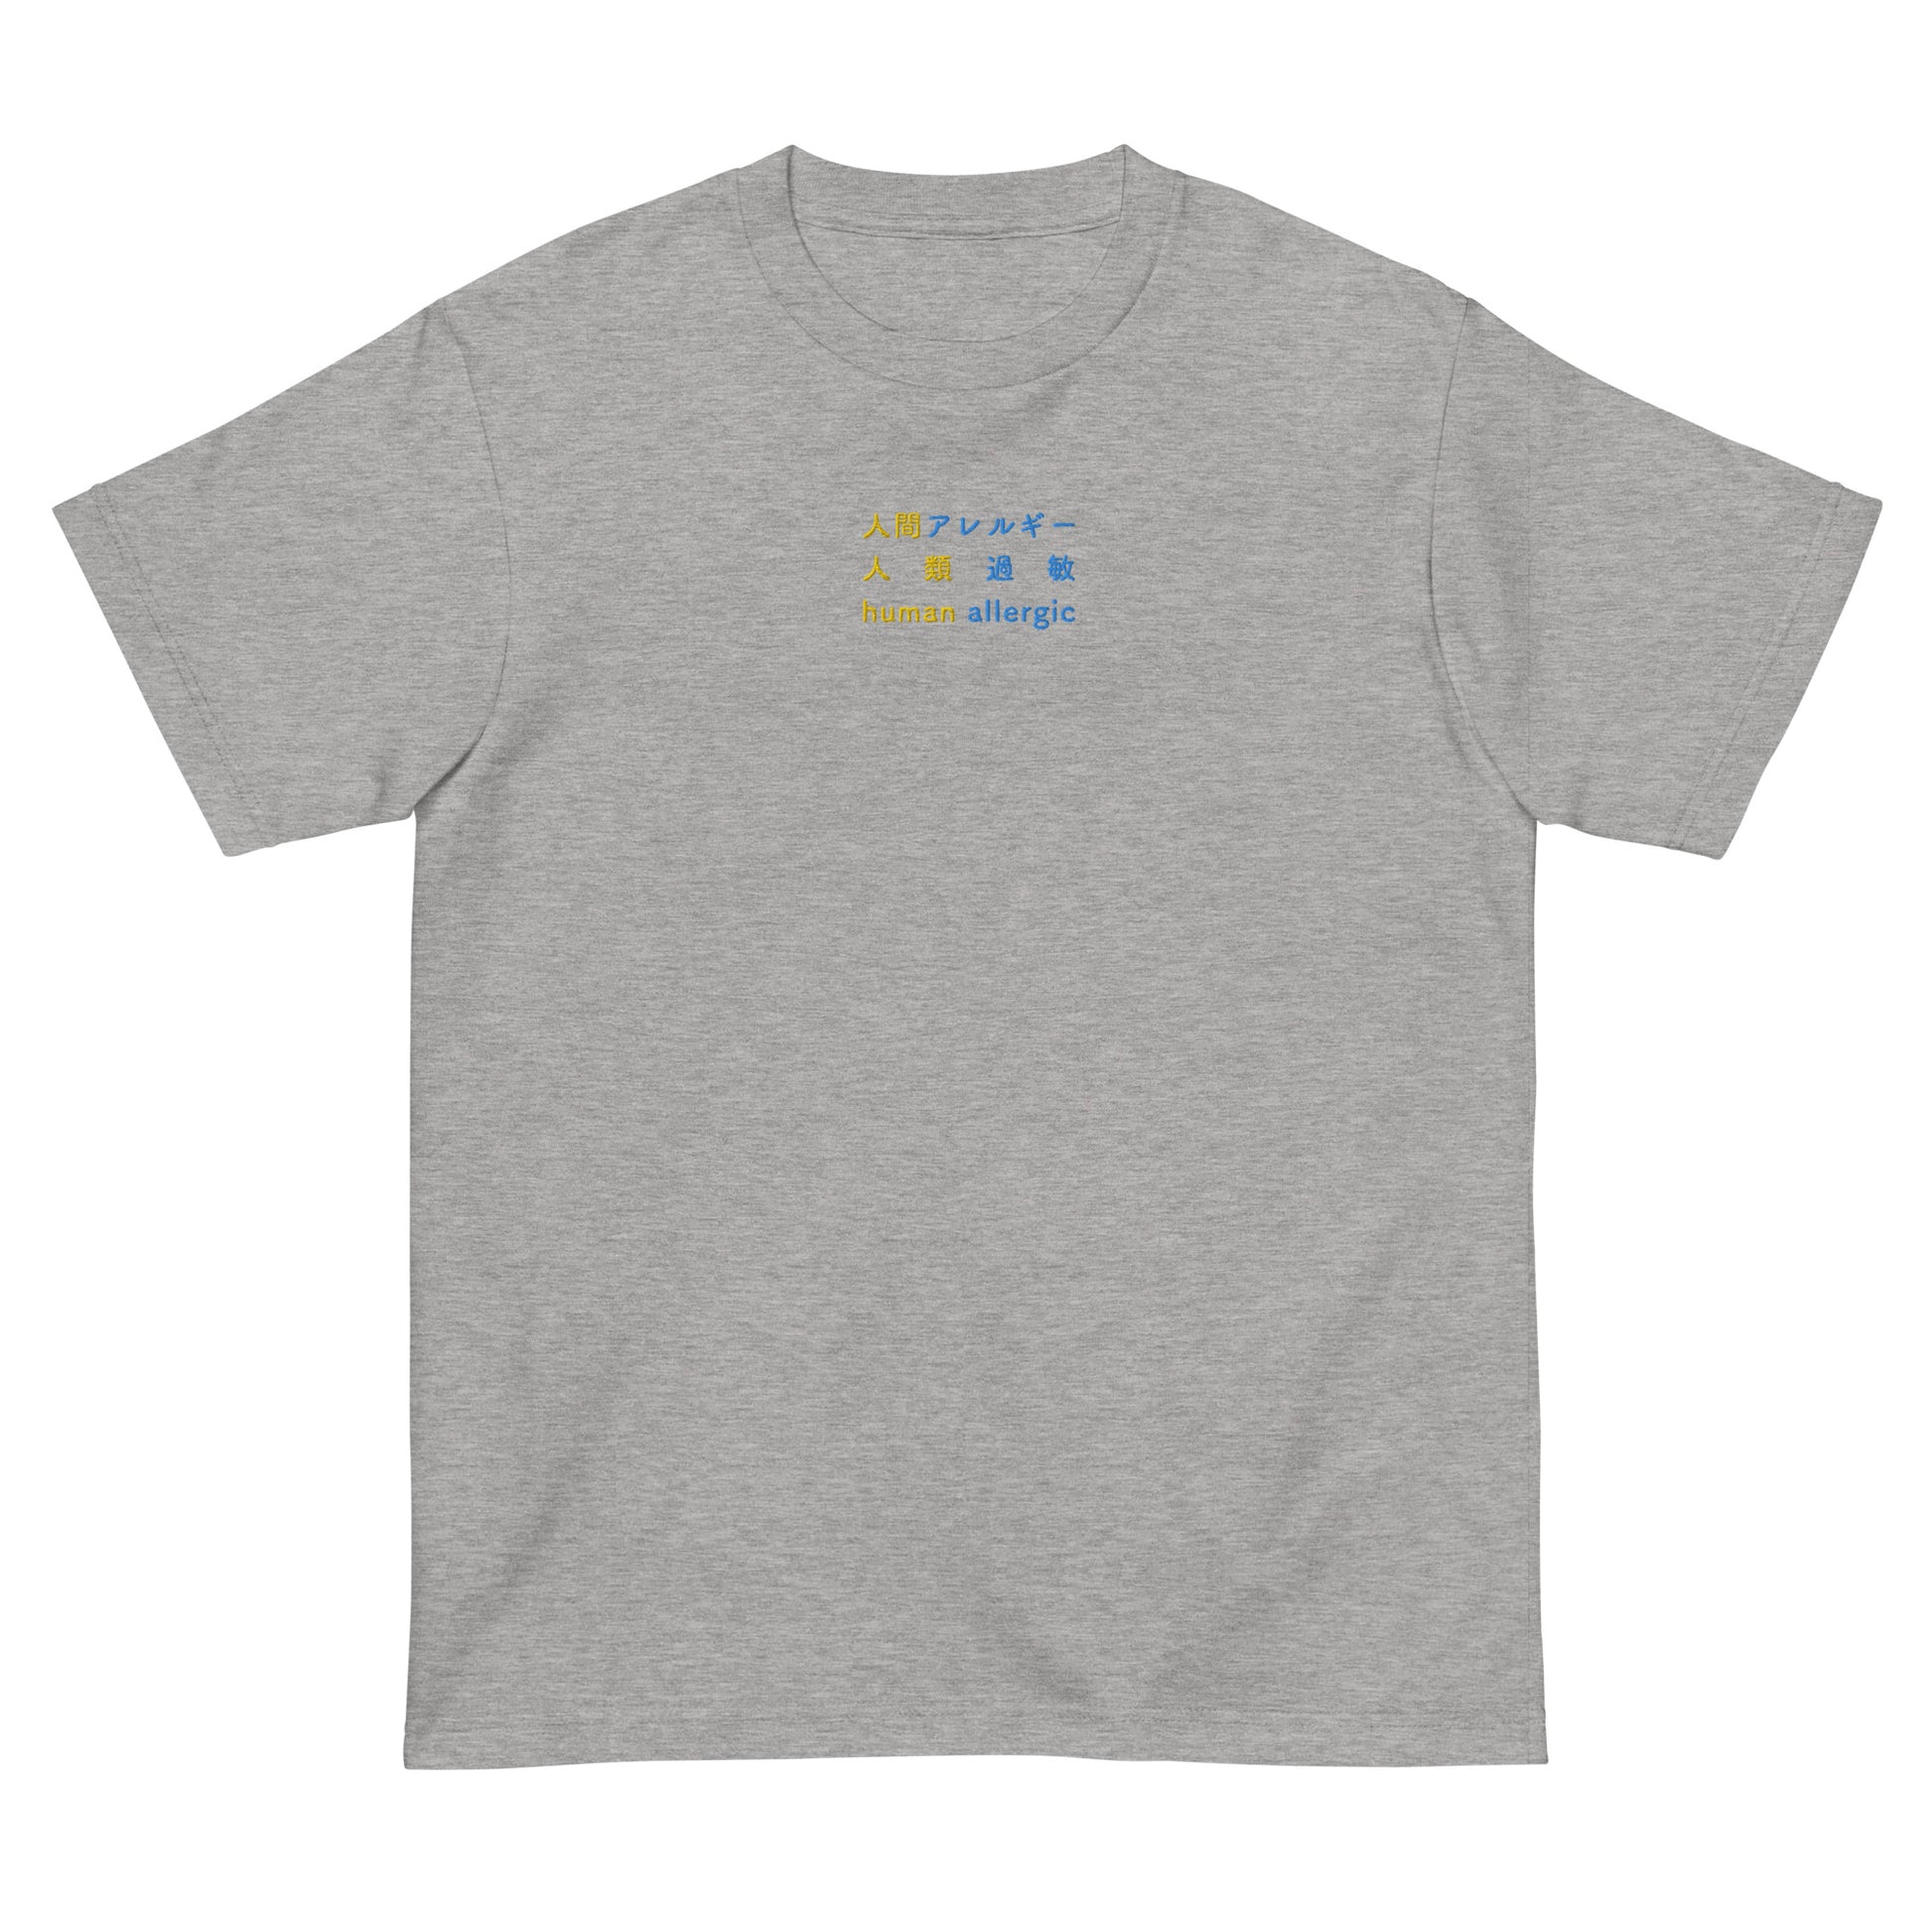 Light Gray High Quality Tee - Front Design with an Yellow, Blue Embroidery "Human Allergic" in Japanese,Chinese and English